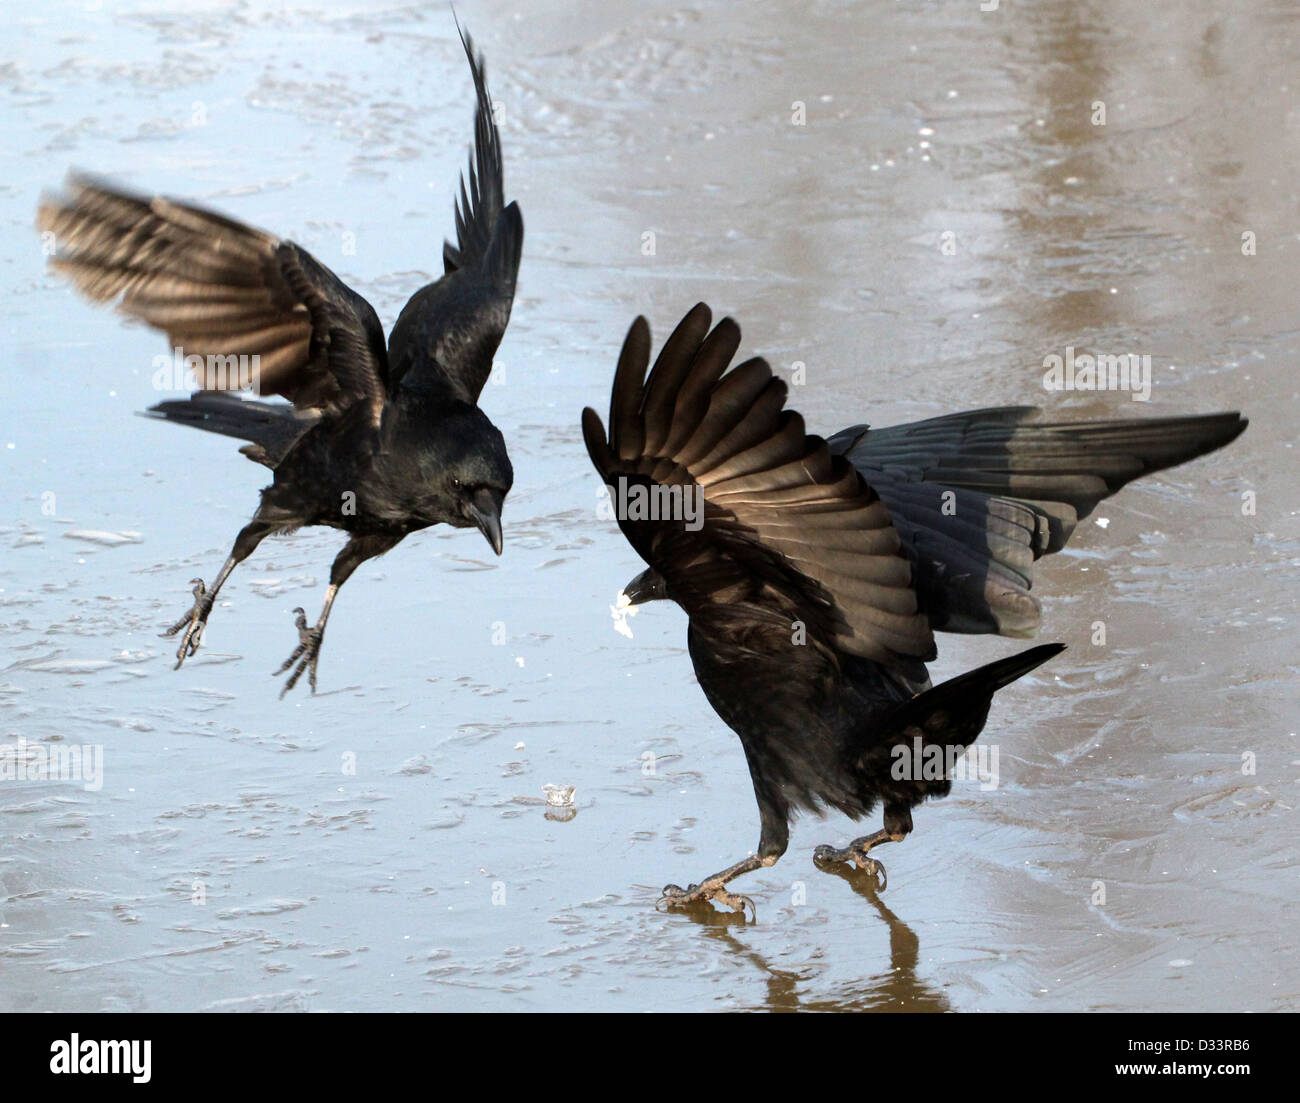 Detailed close up of a two black carrion crows (Corvus Corone) cavorting on the ice Stock Photo